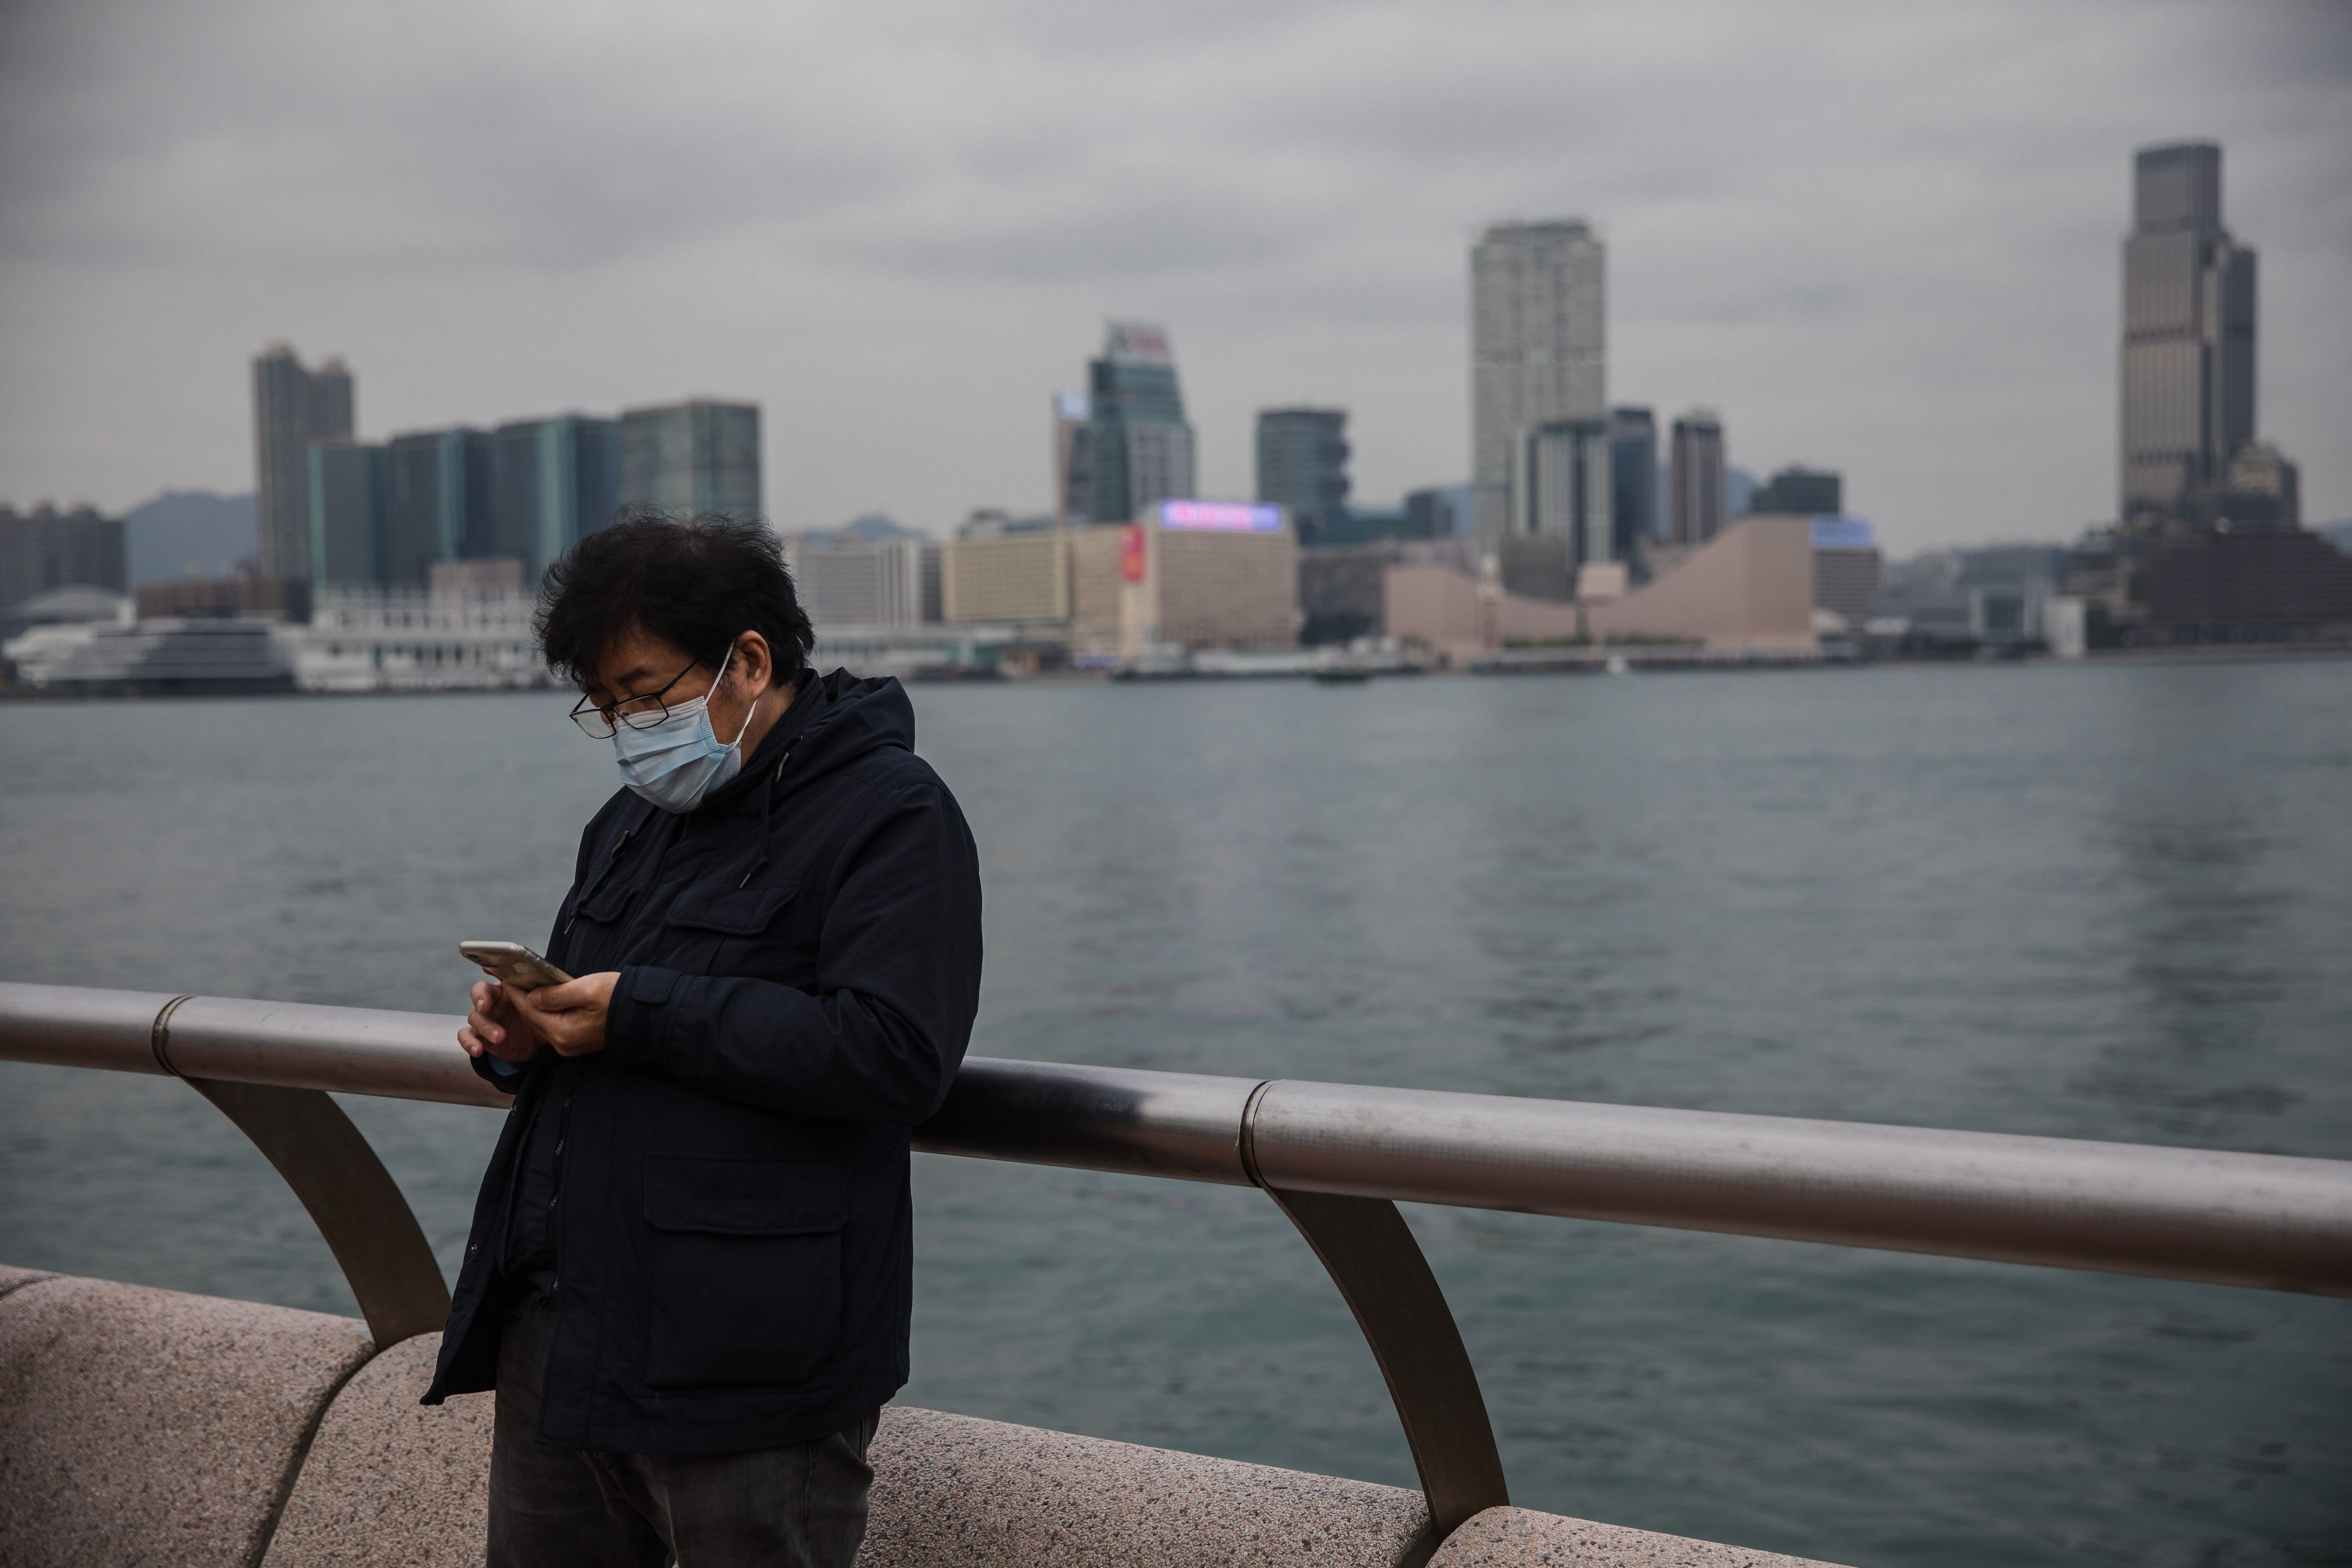 A man wearing a protective face mask uses his phone in Hong Kong on February 9, 2020, as a preventative measure after a coronavirus outbreak which began in the Chinese city of Wuhan. (AFP Photo)